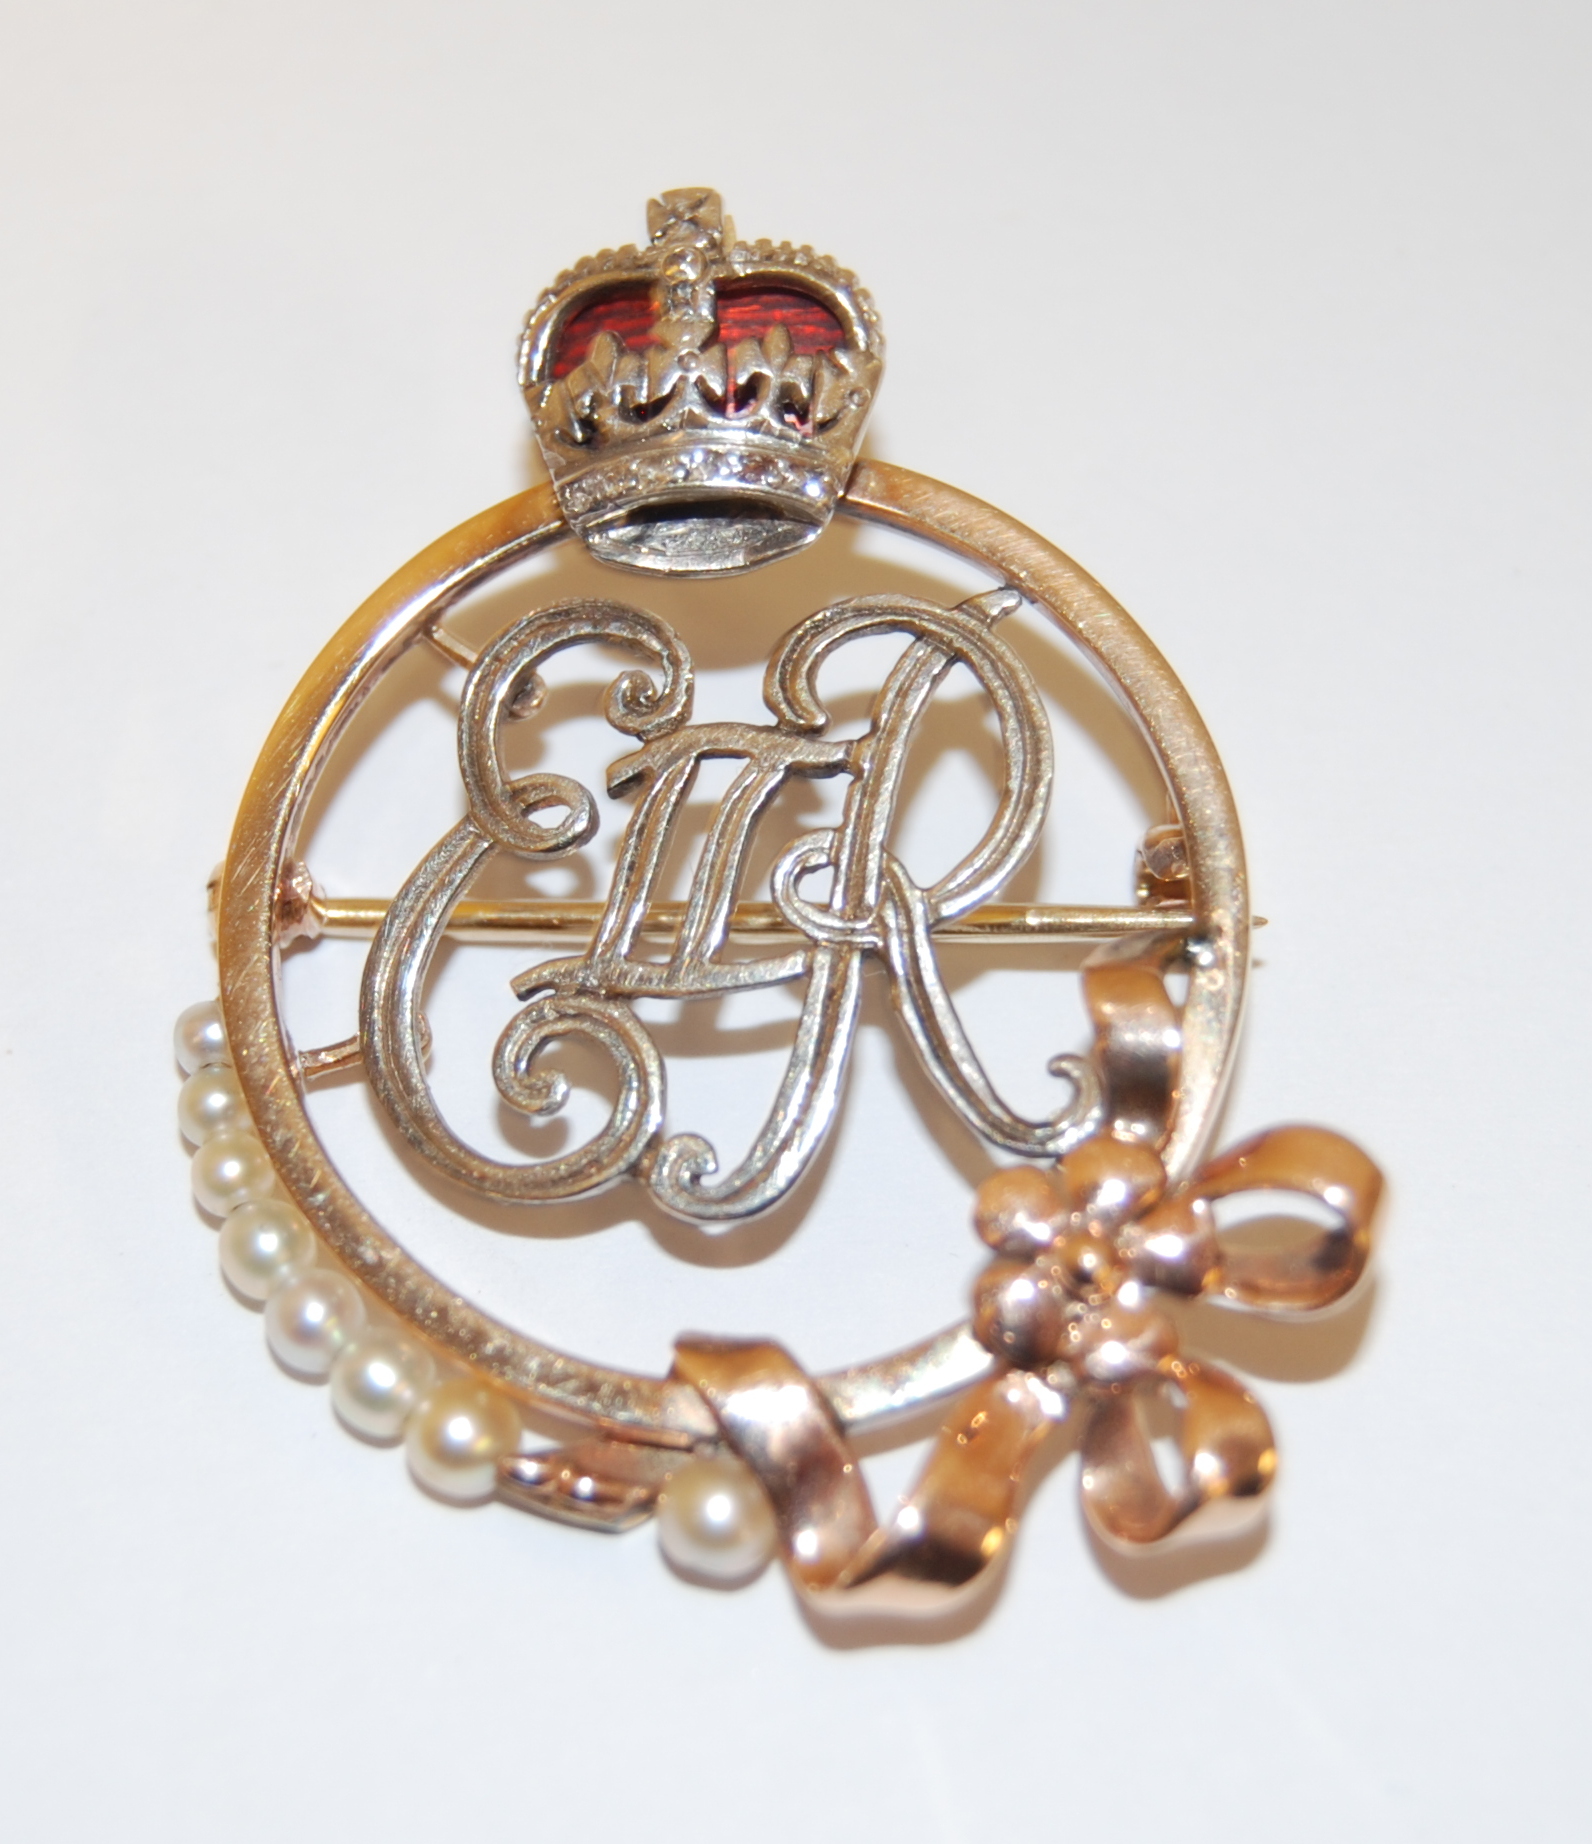 A yellow and white metal Elizabeth II Royal monogram brooch, of circular form with ERII initials - Image 4 of 7